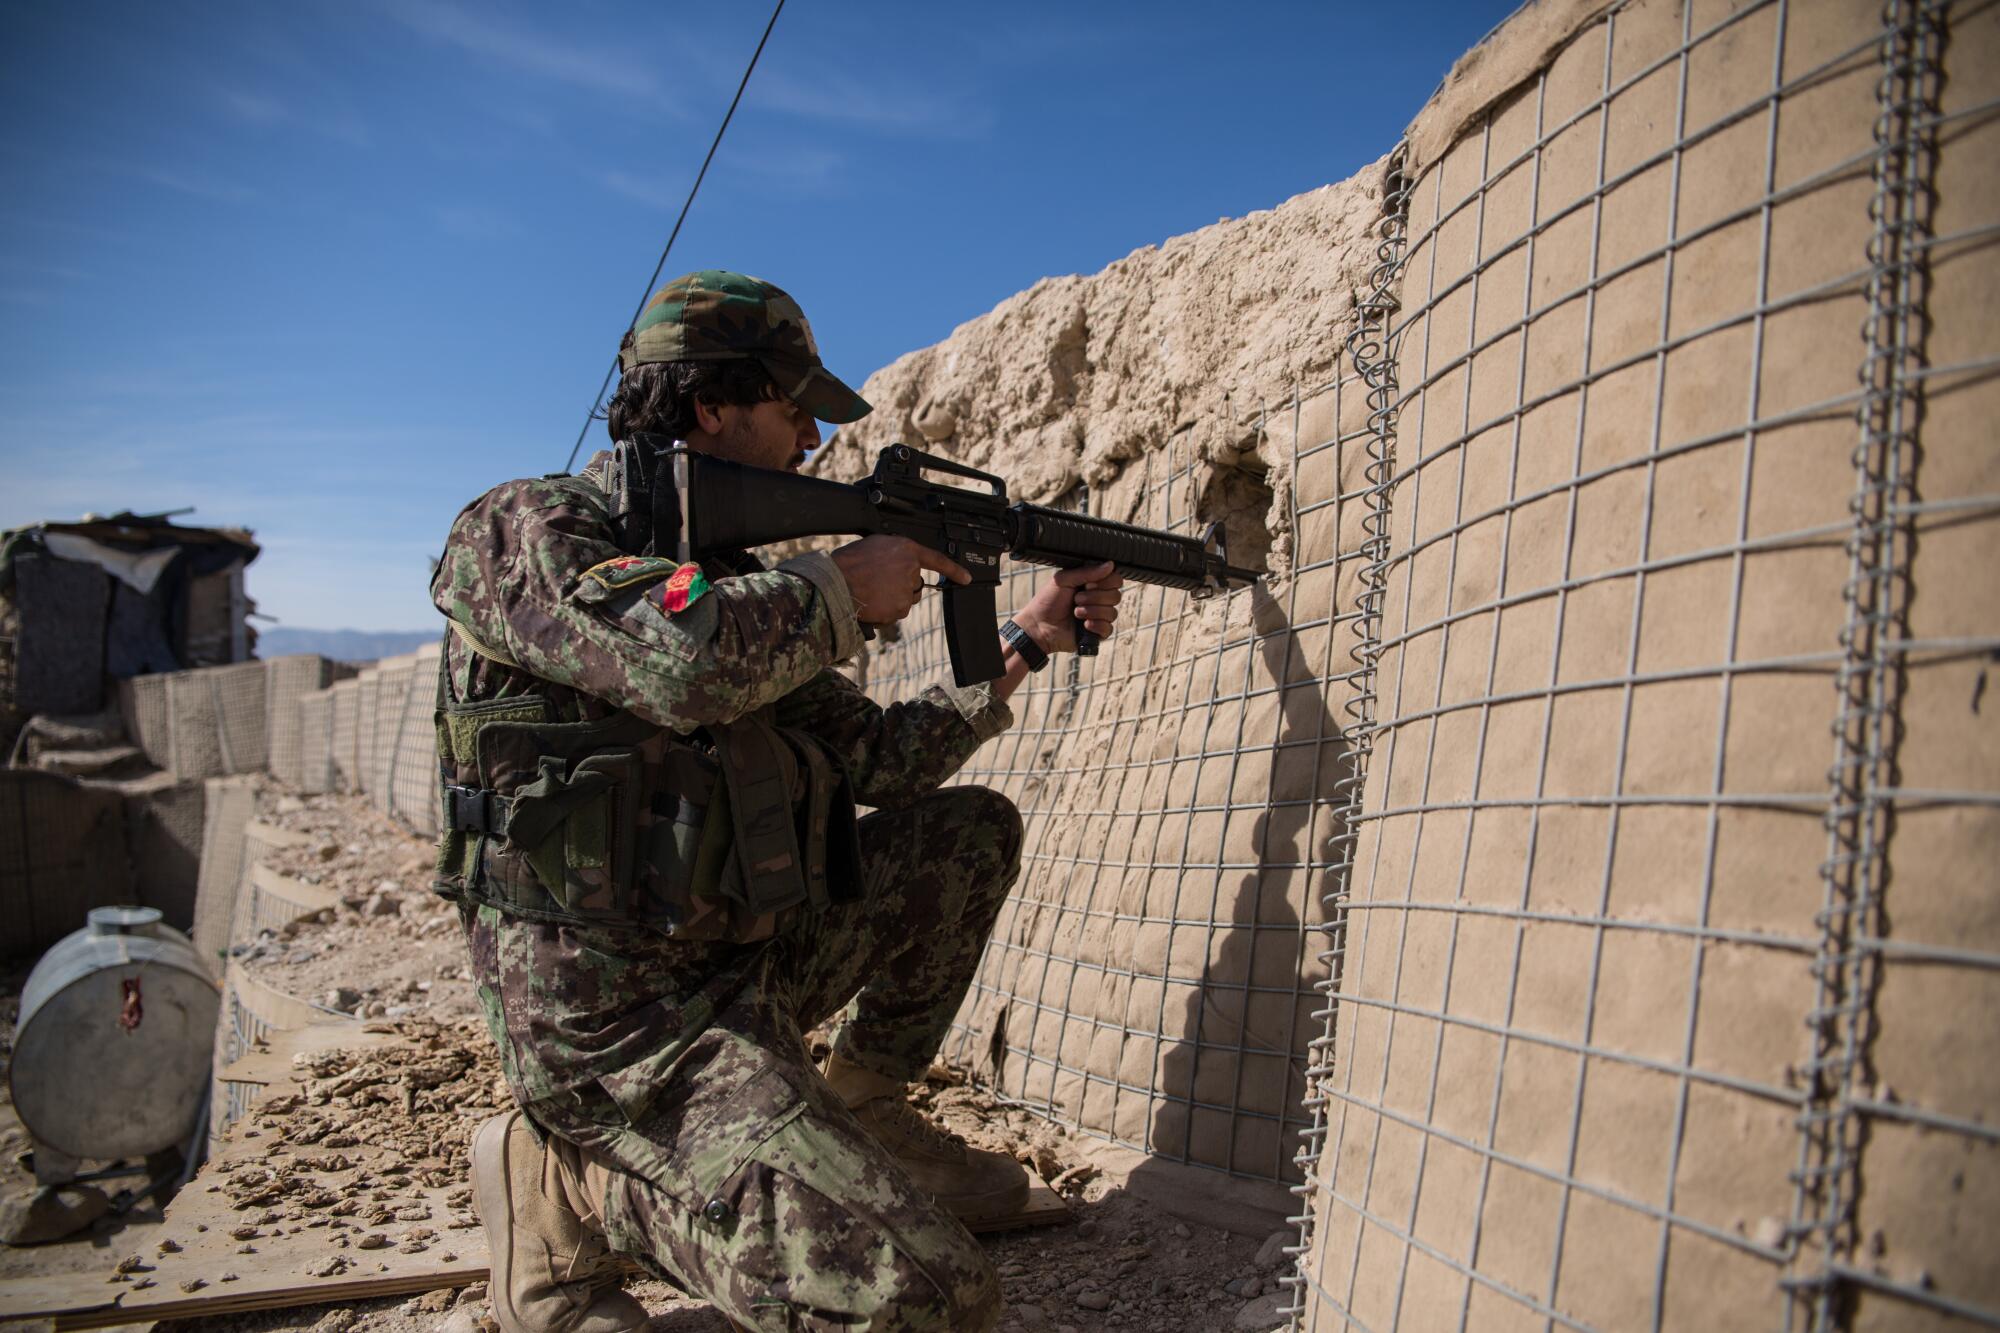 At the Zabul province outpost, an Afghan soldier keeps watch.